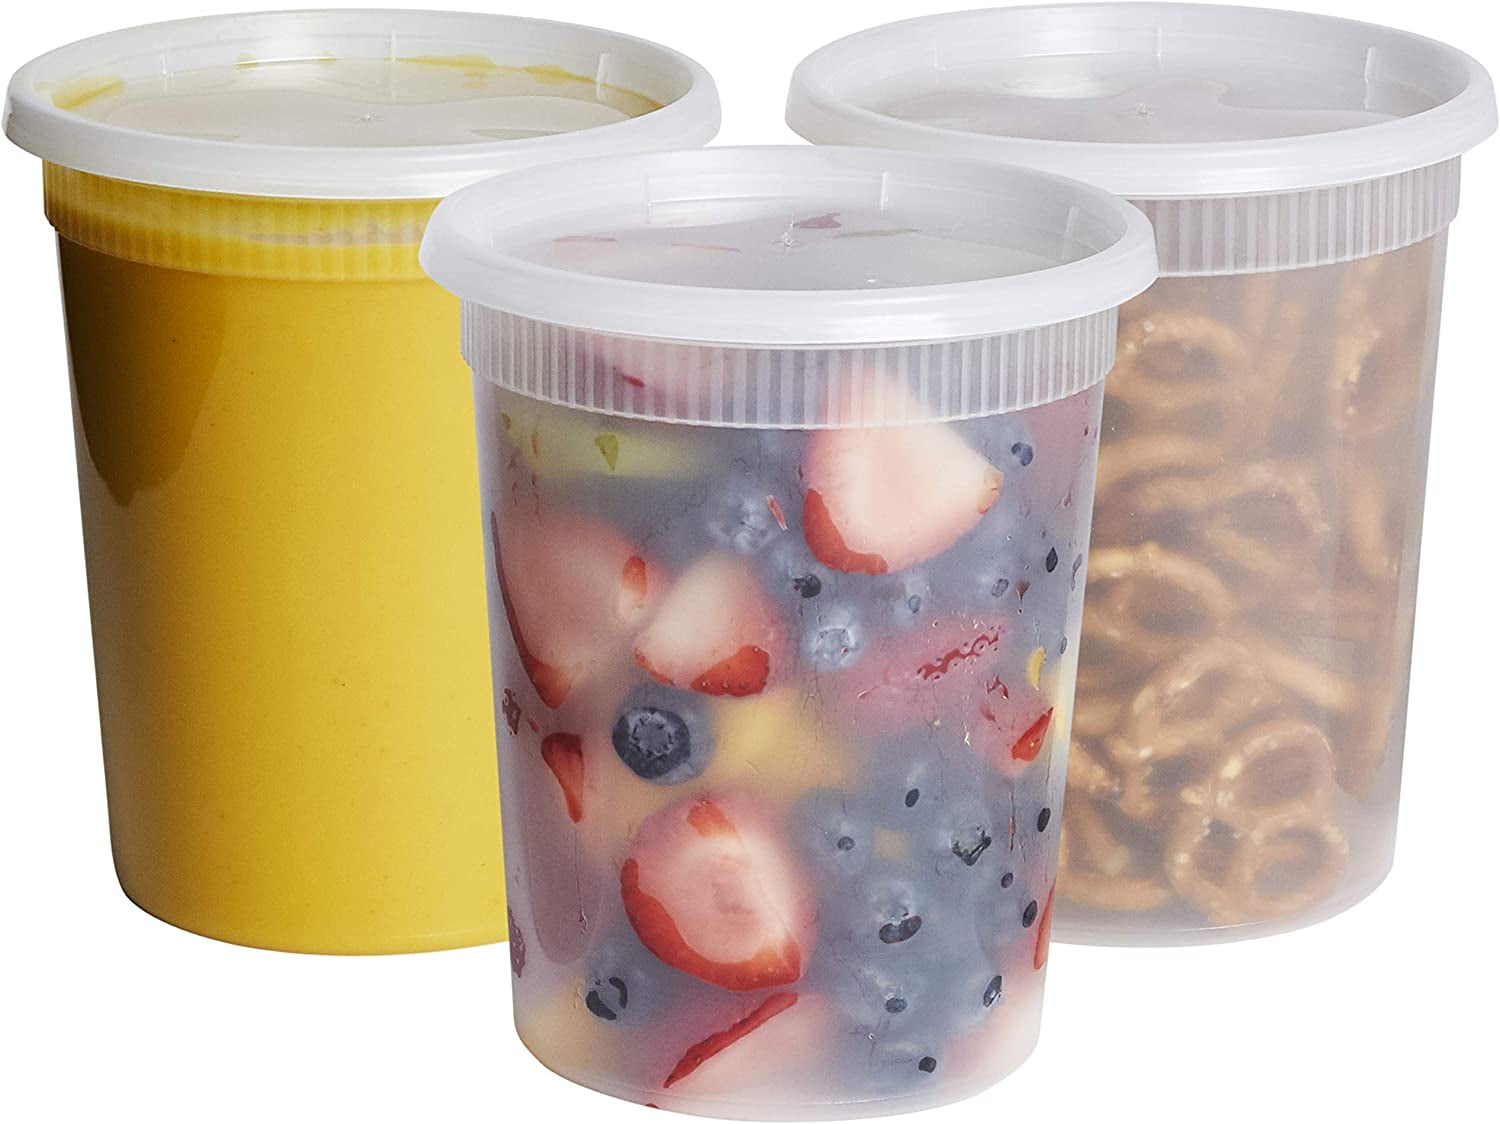 SHOPDAY Deli-Containers-with-Lids-32 Oz [50 Sets] -  Plastic-Food-Storage-Containers-with-Airtight-Lids,  Freezer-Containers-for-Meal-Prep